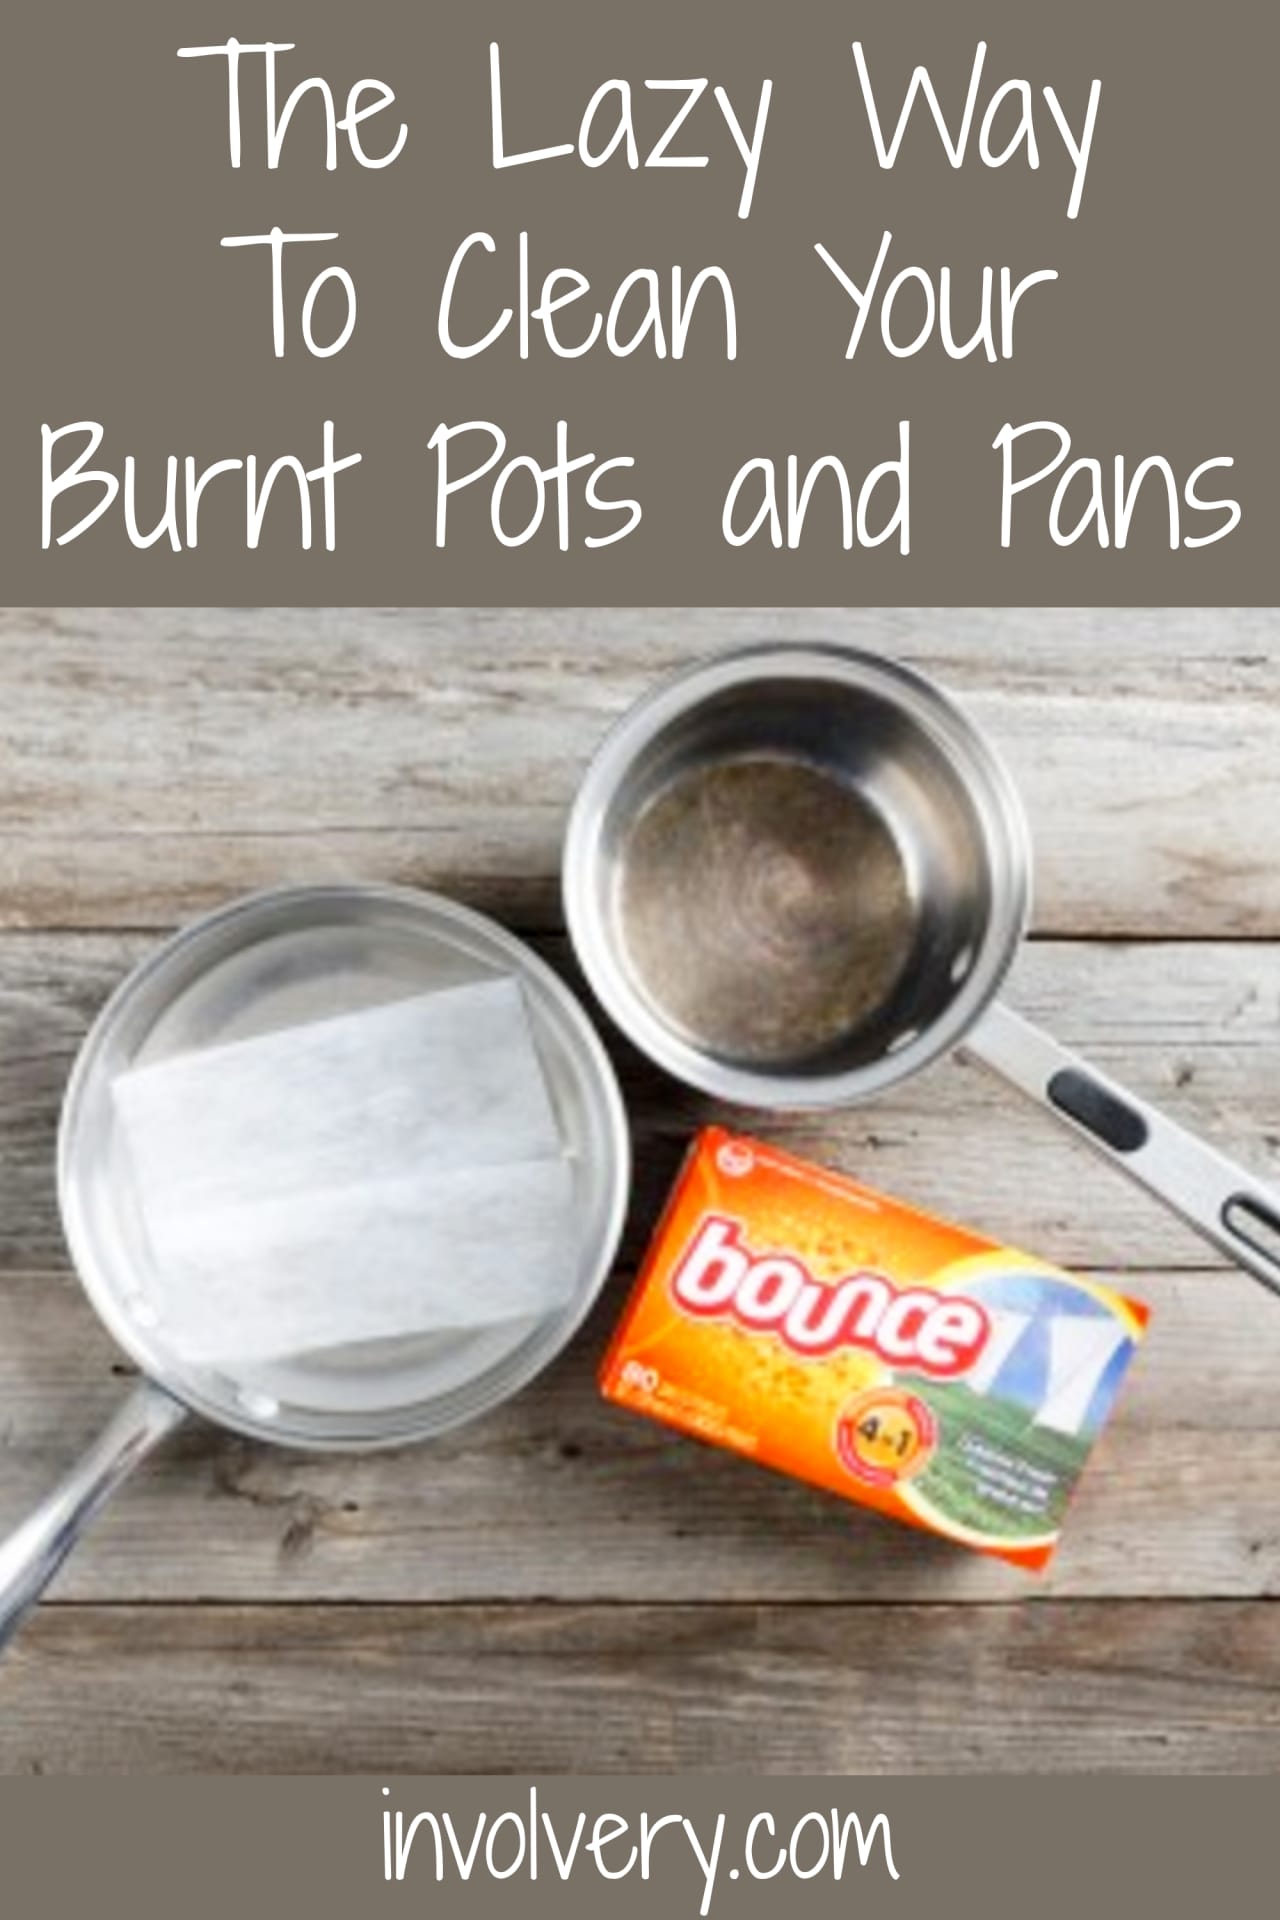 kitchen cleaning hacks - Lazy Cleaning Hacks - the simple way to clean pots and pans with burnt on food and stains - brilliant lazy girl cleaning hacks that work!